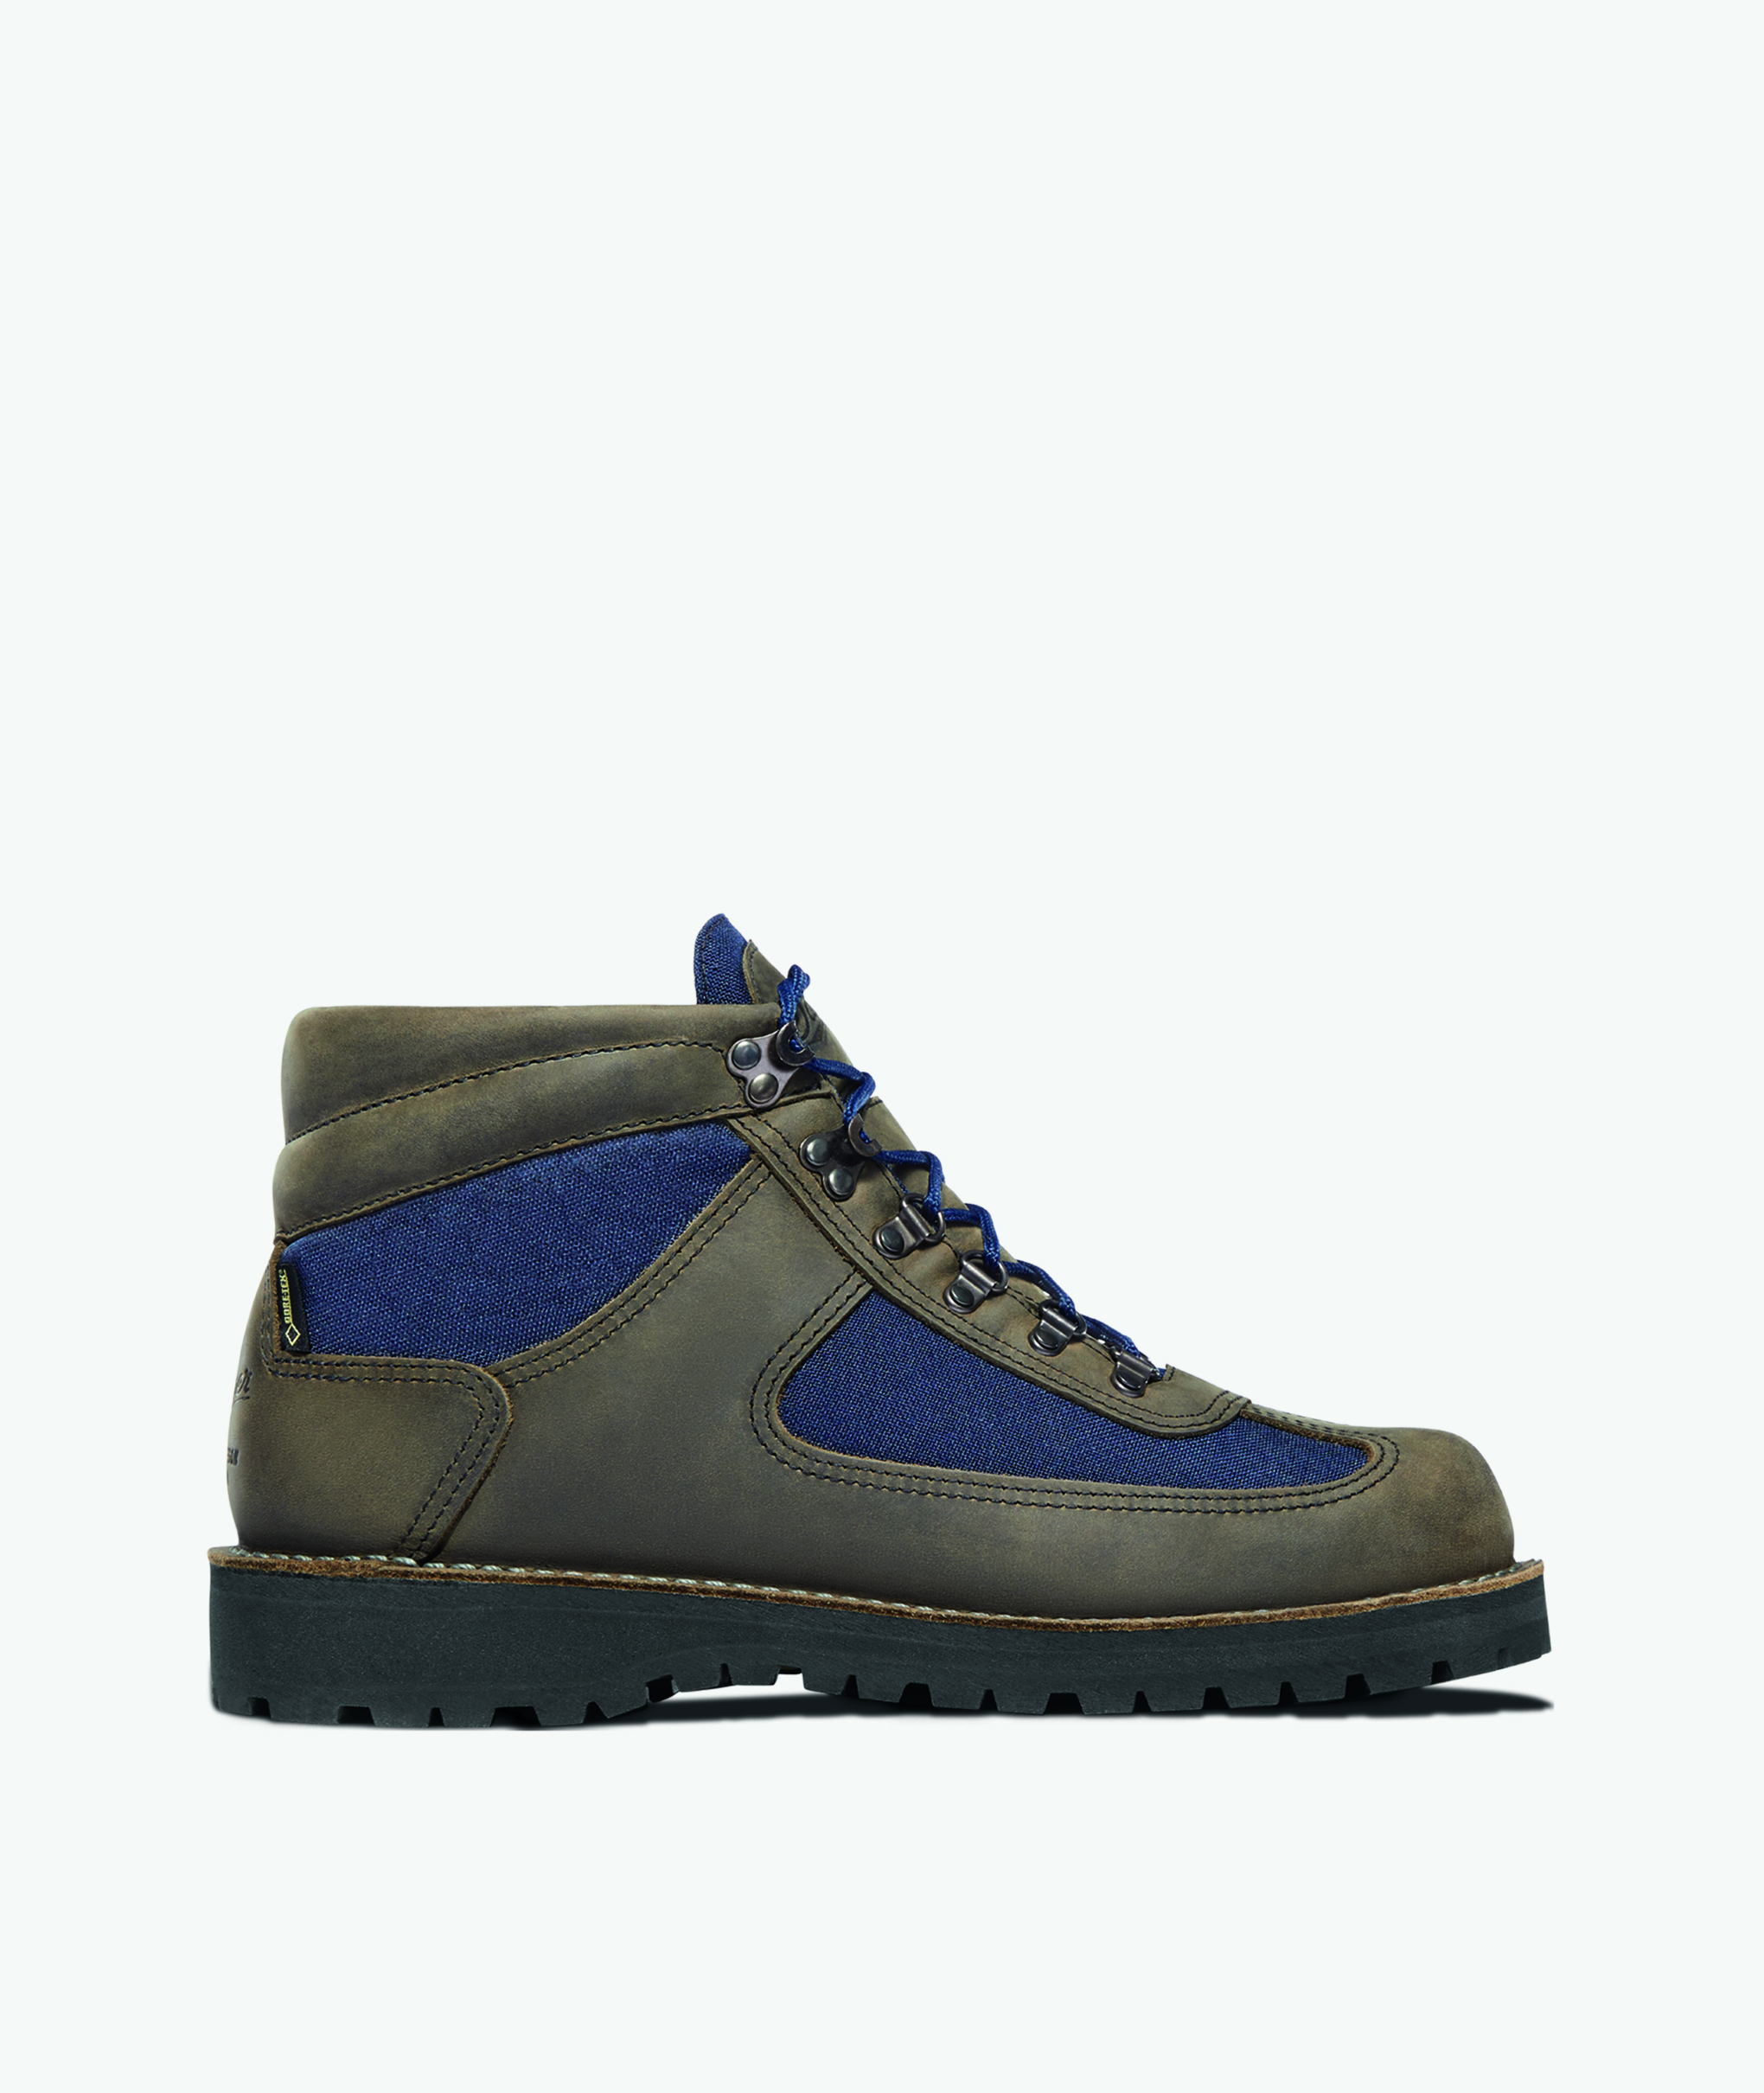 Norse Store | Shipping Worldwide - Boots - Danner - Feather Light